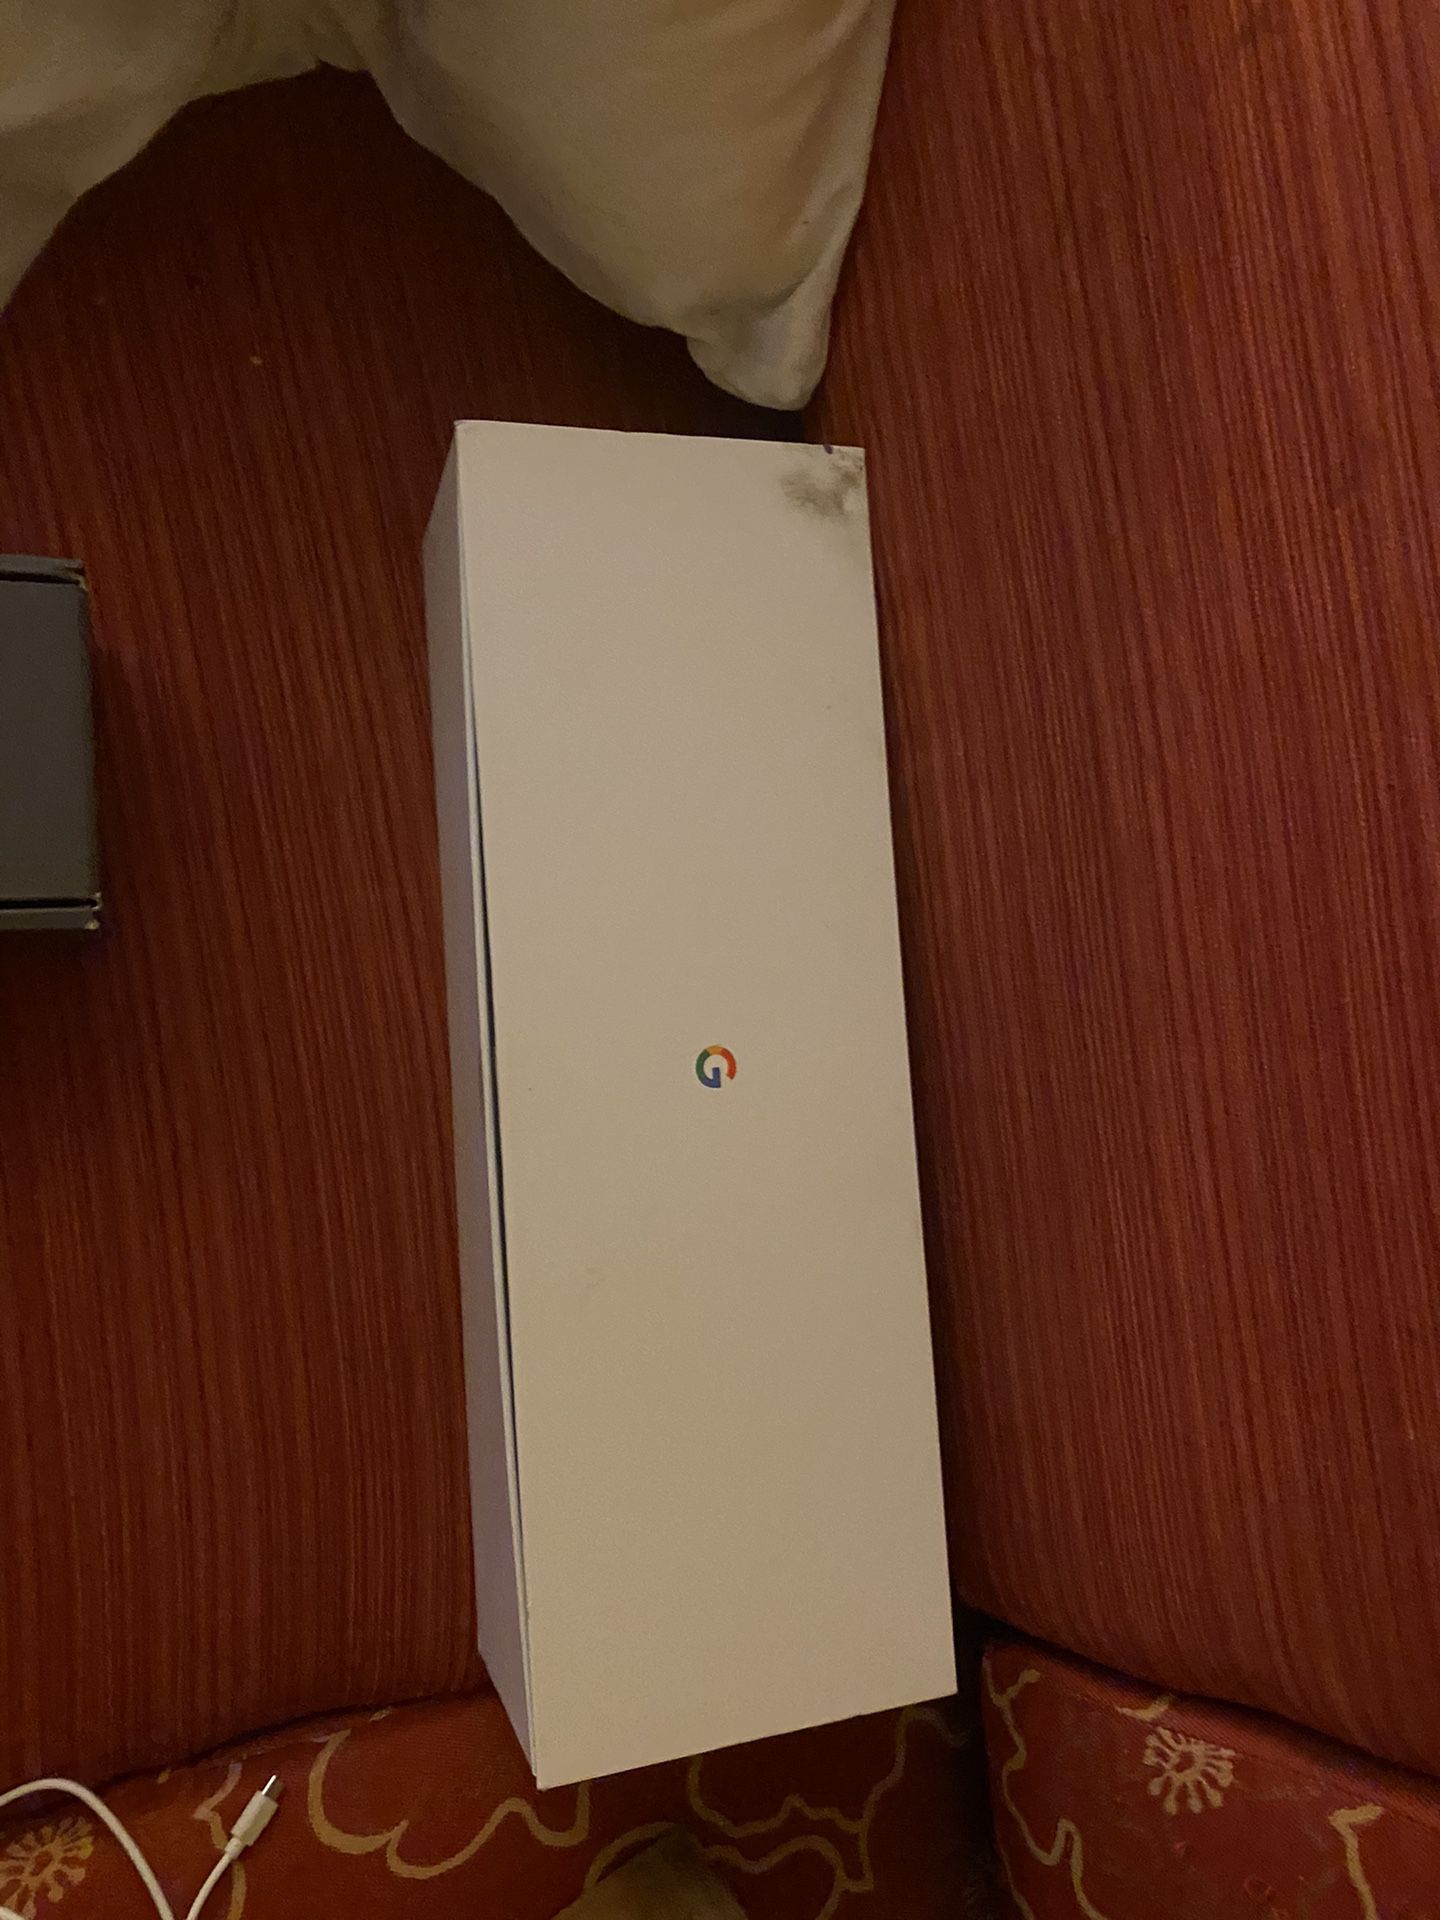 Google router/WiFi booster